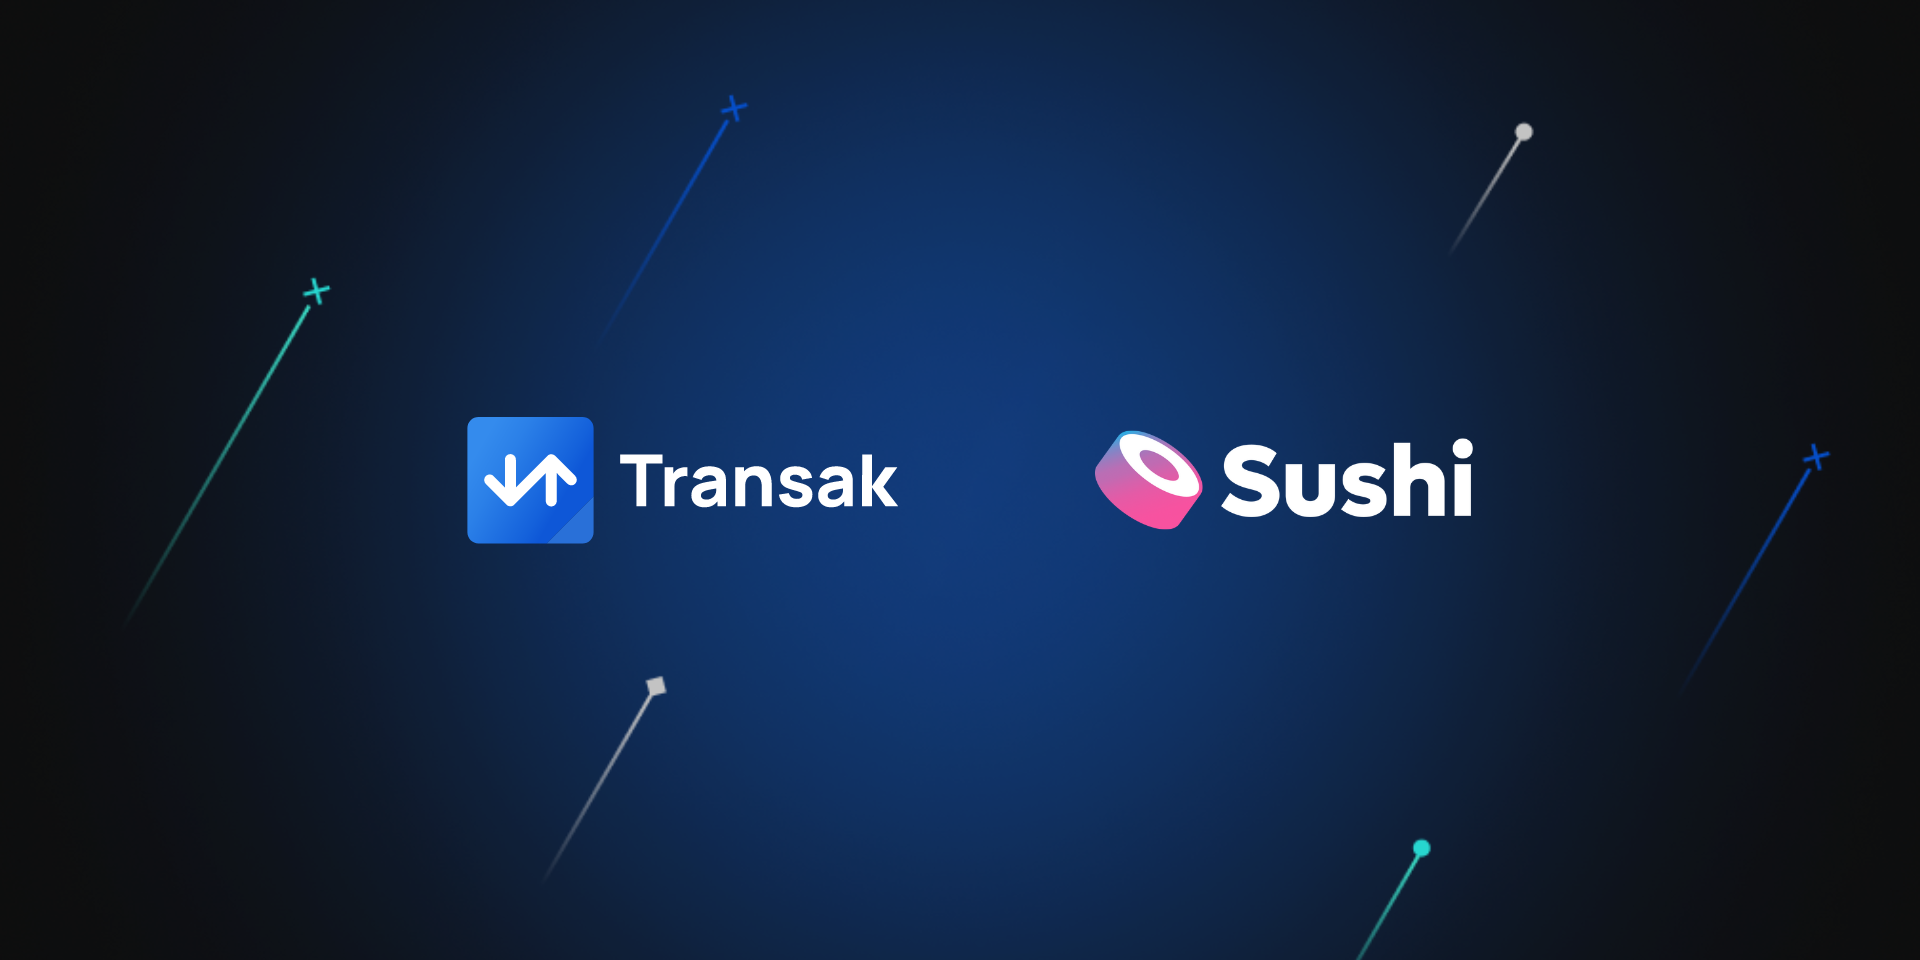 Sushi integrates Transak to onboard users